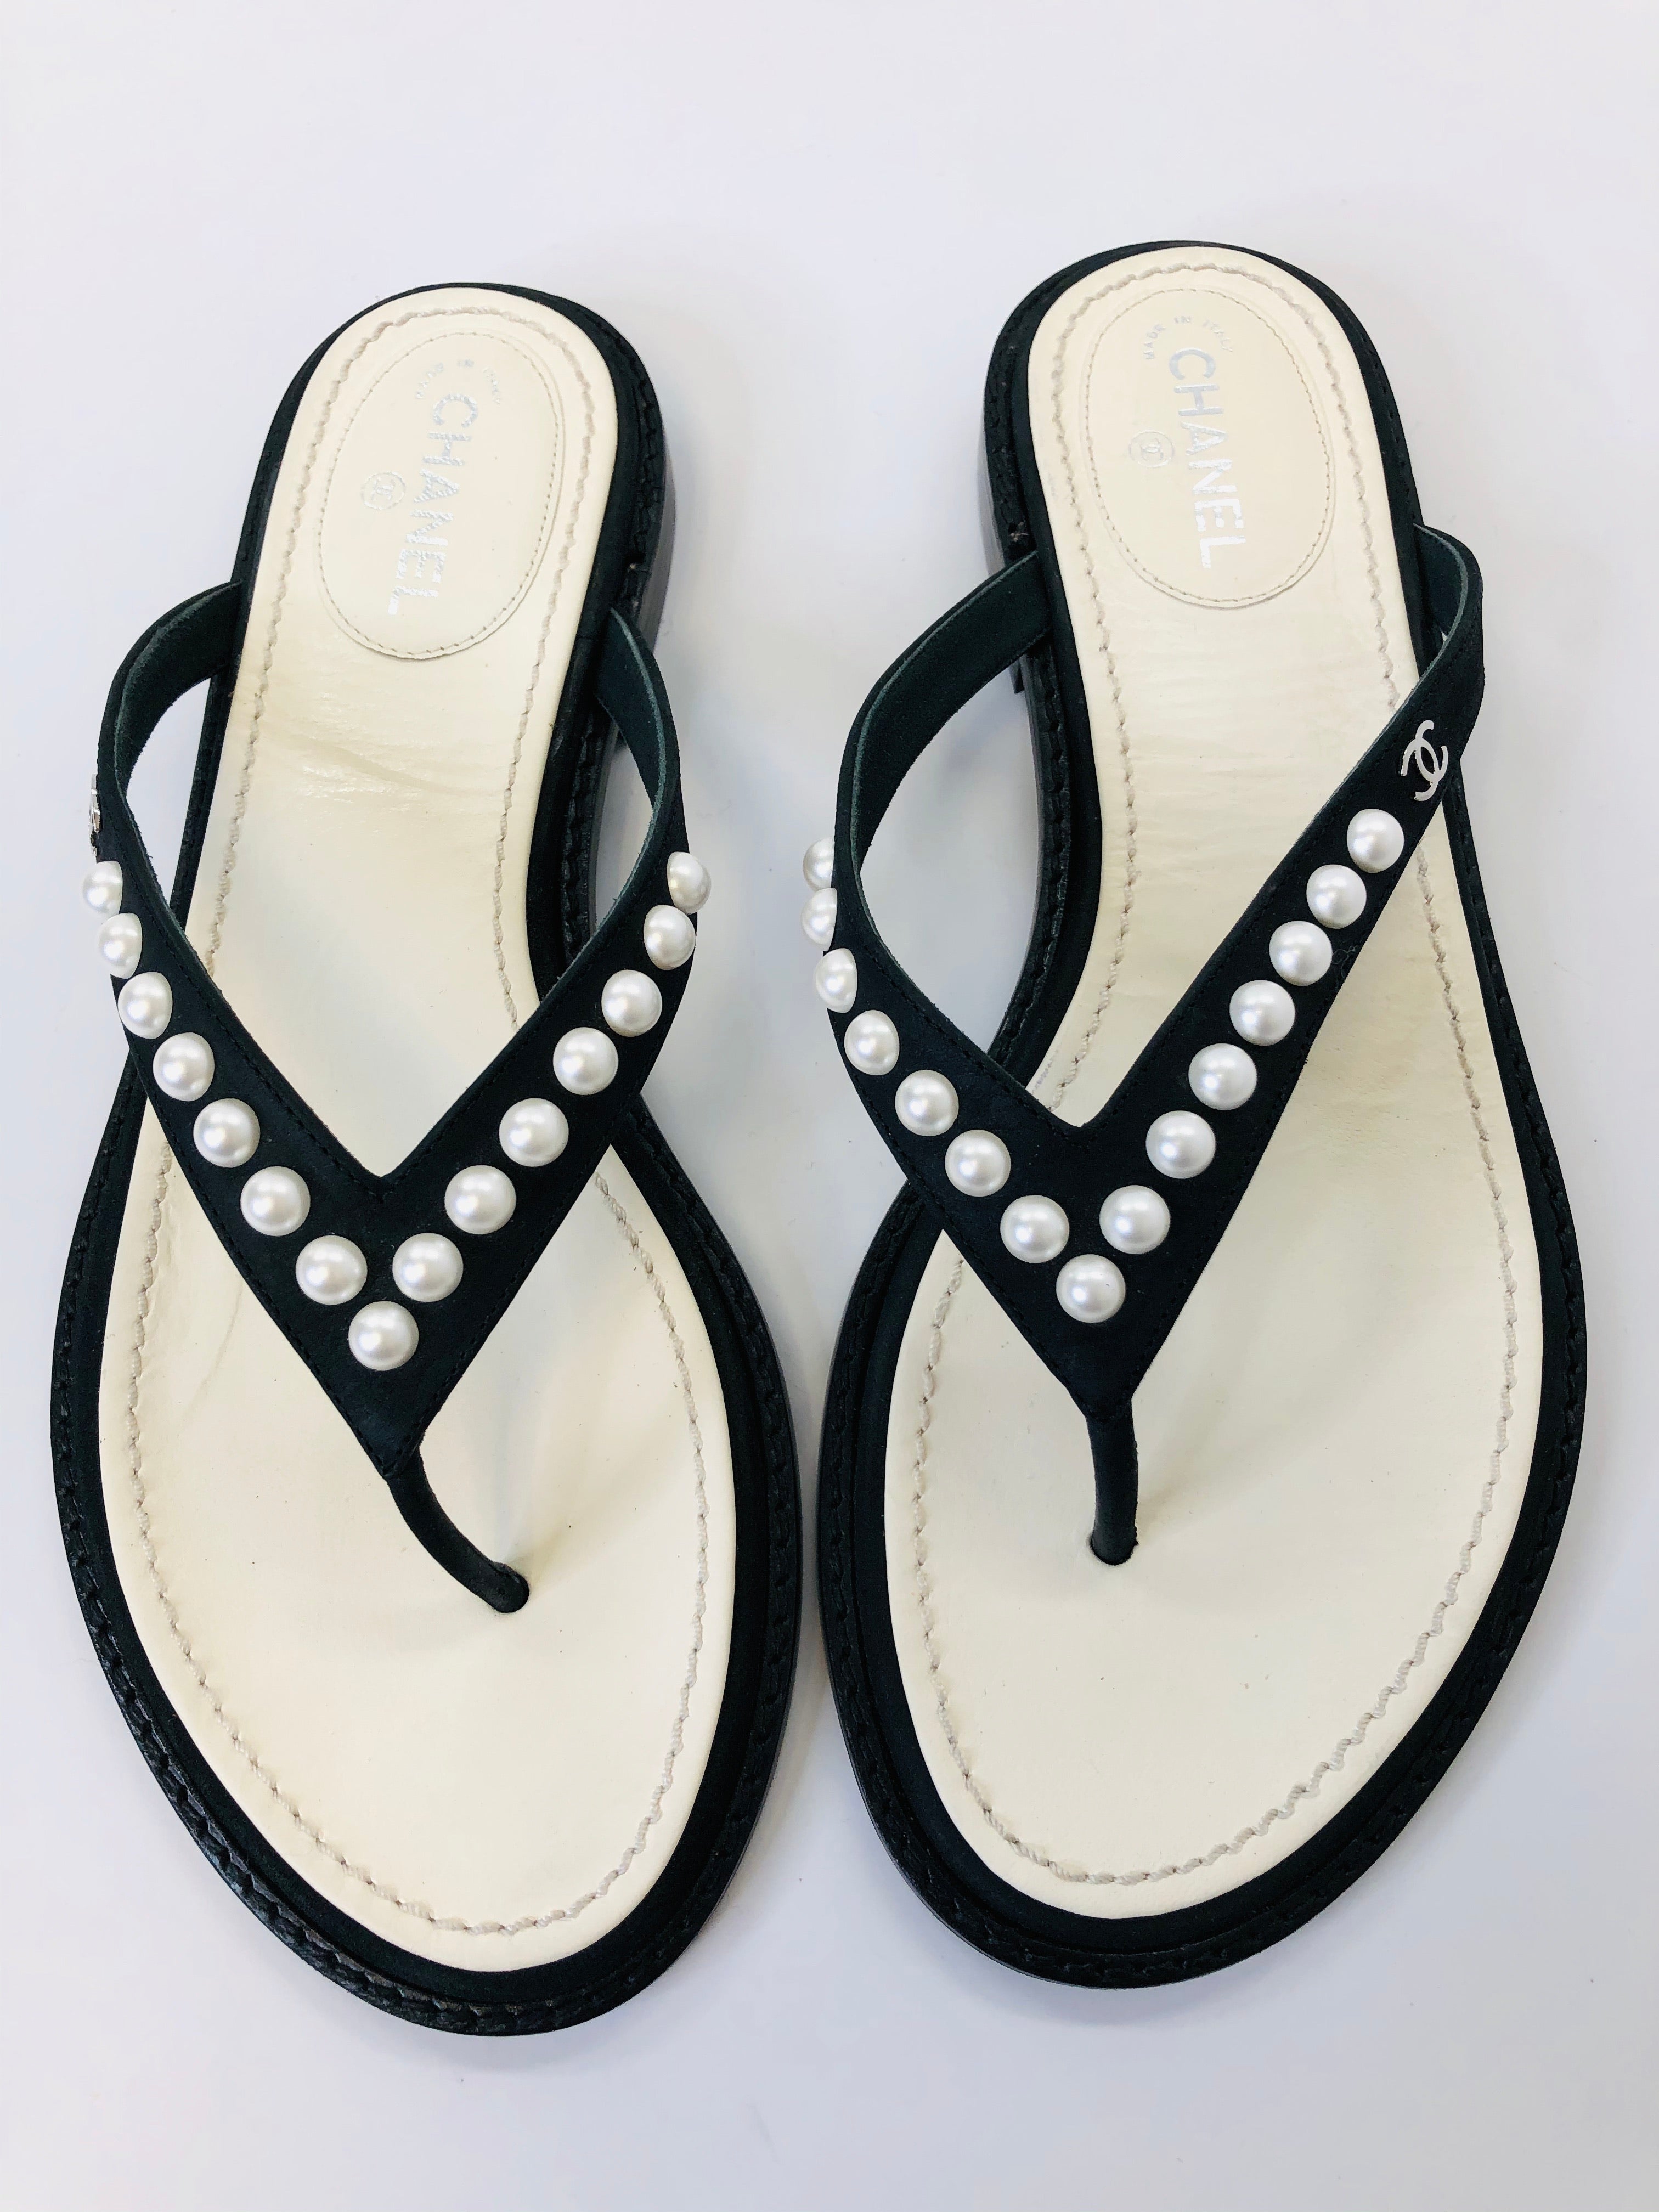 CHANEL Black and Ivory Leather Pearl Thong Sandals Size 37 1/2